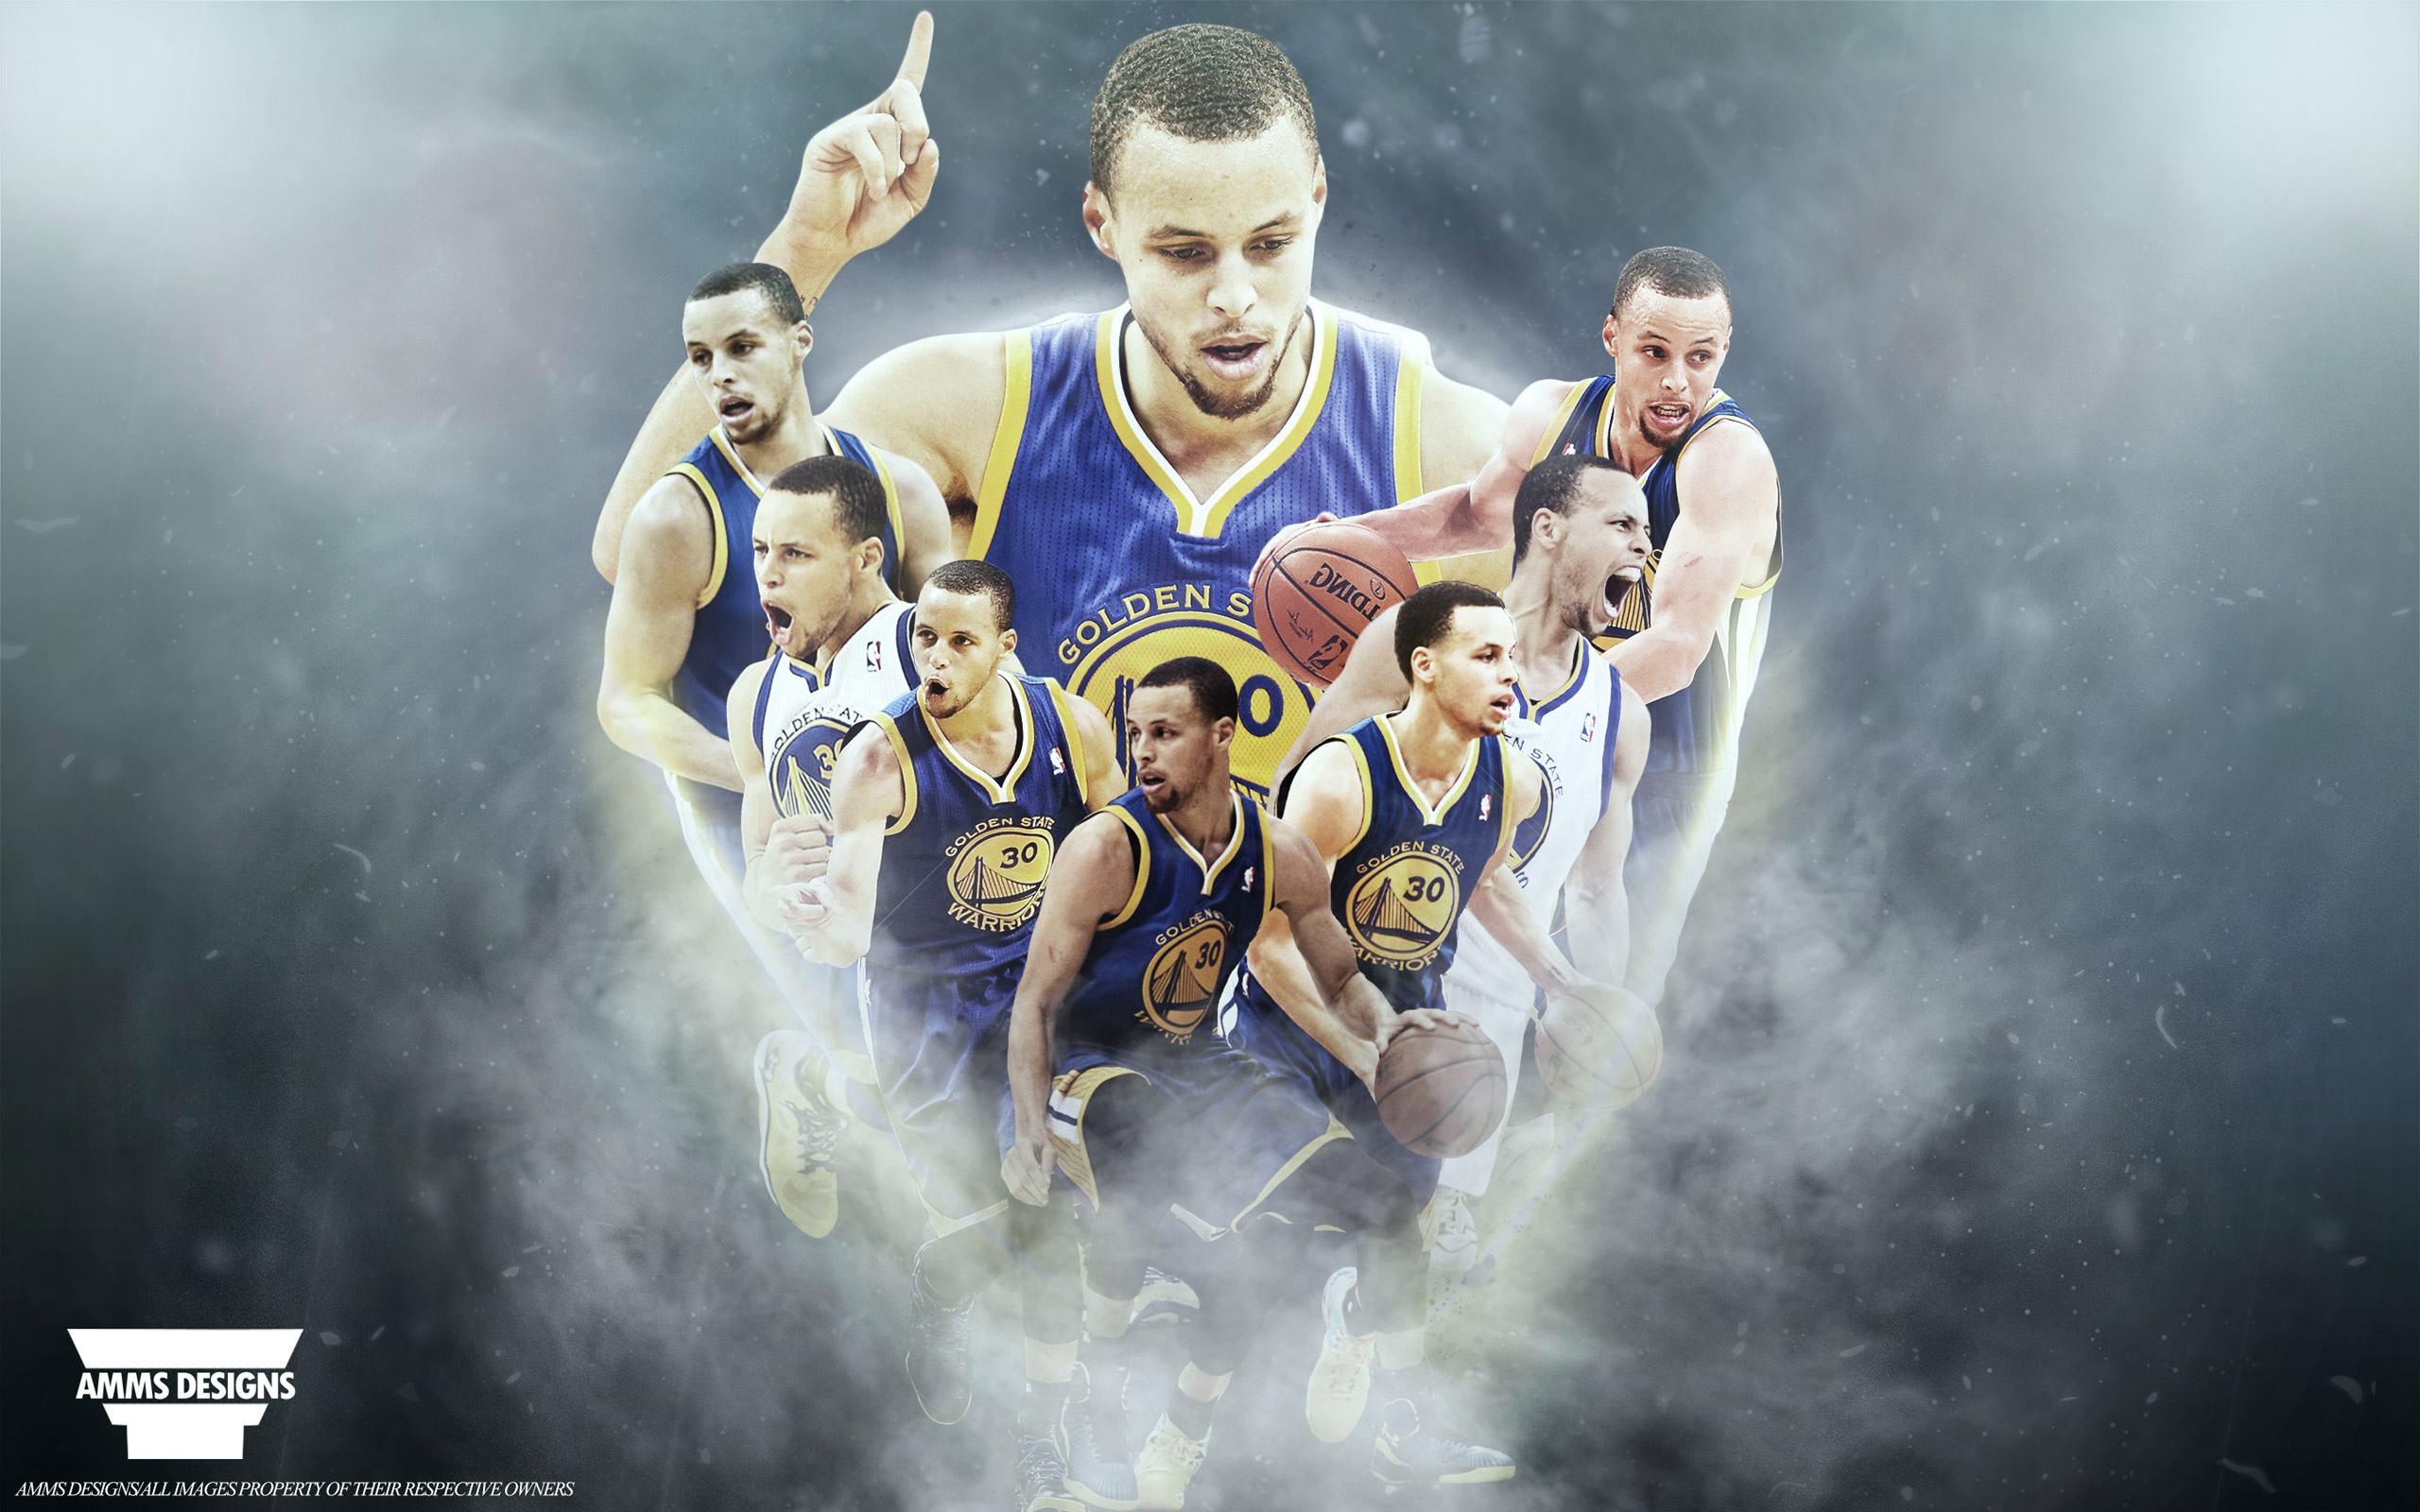 49+ Stephen Curry Shoes Wallpaper on WallpaperSafari